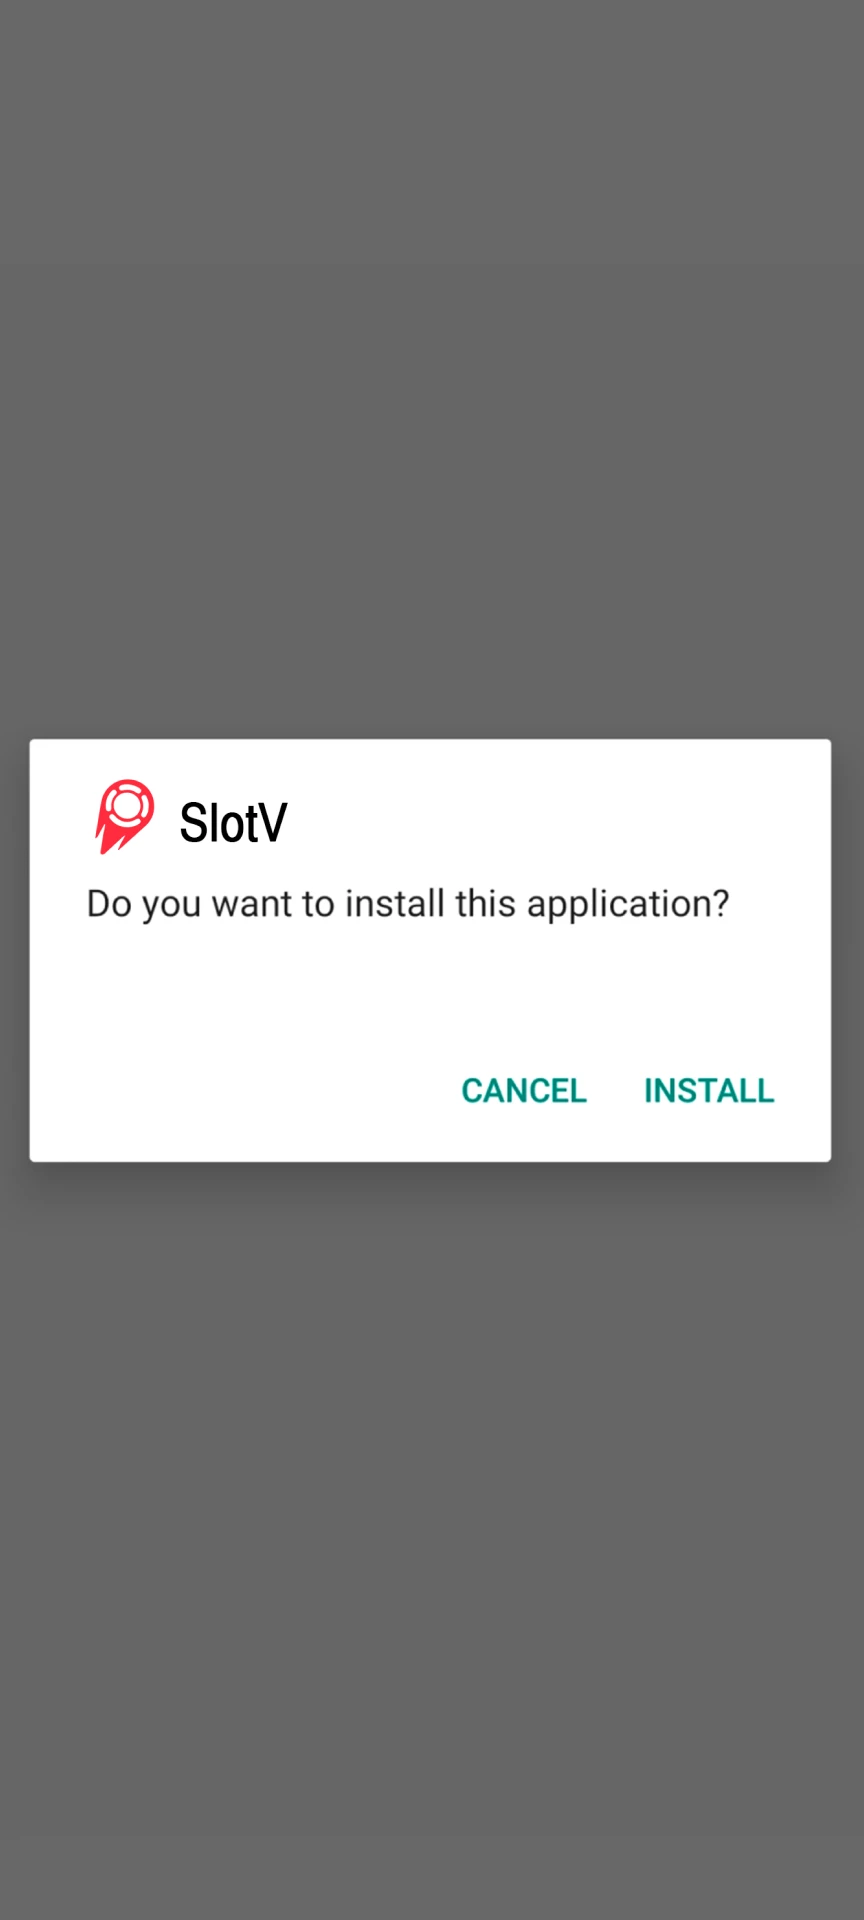 Install the SlotV app on Android.